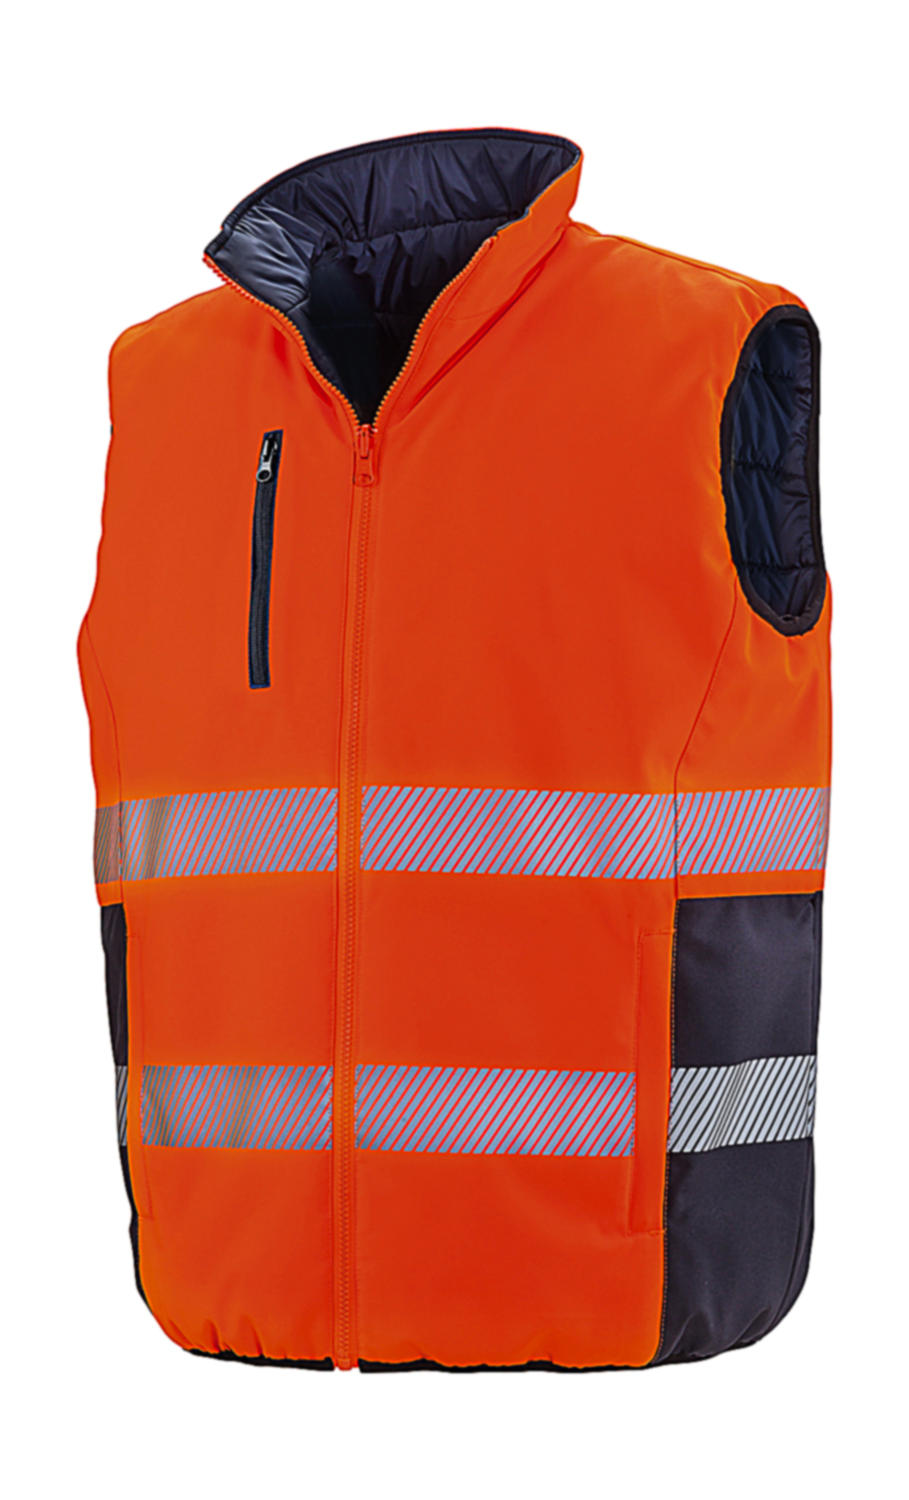  Reversible Soft Padded Safety Gilet in Farbe Fluo Orange/Navy